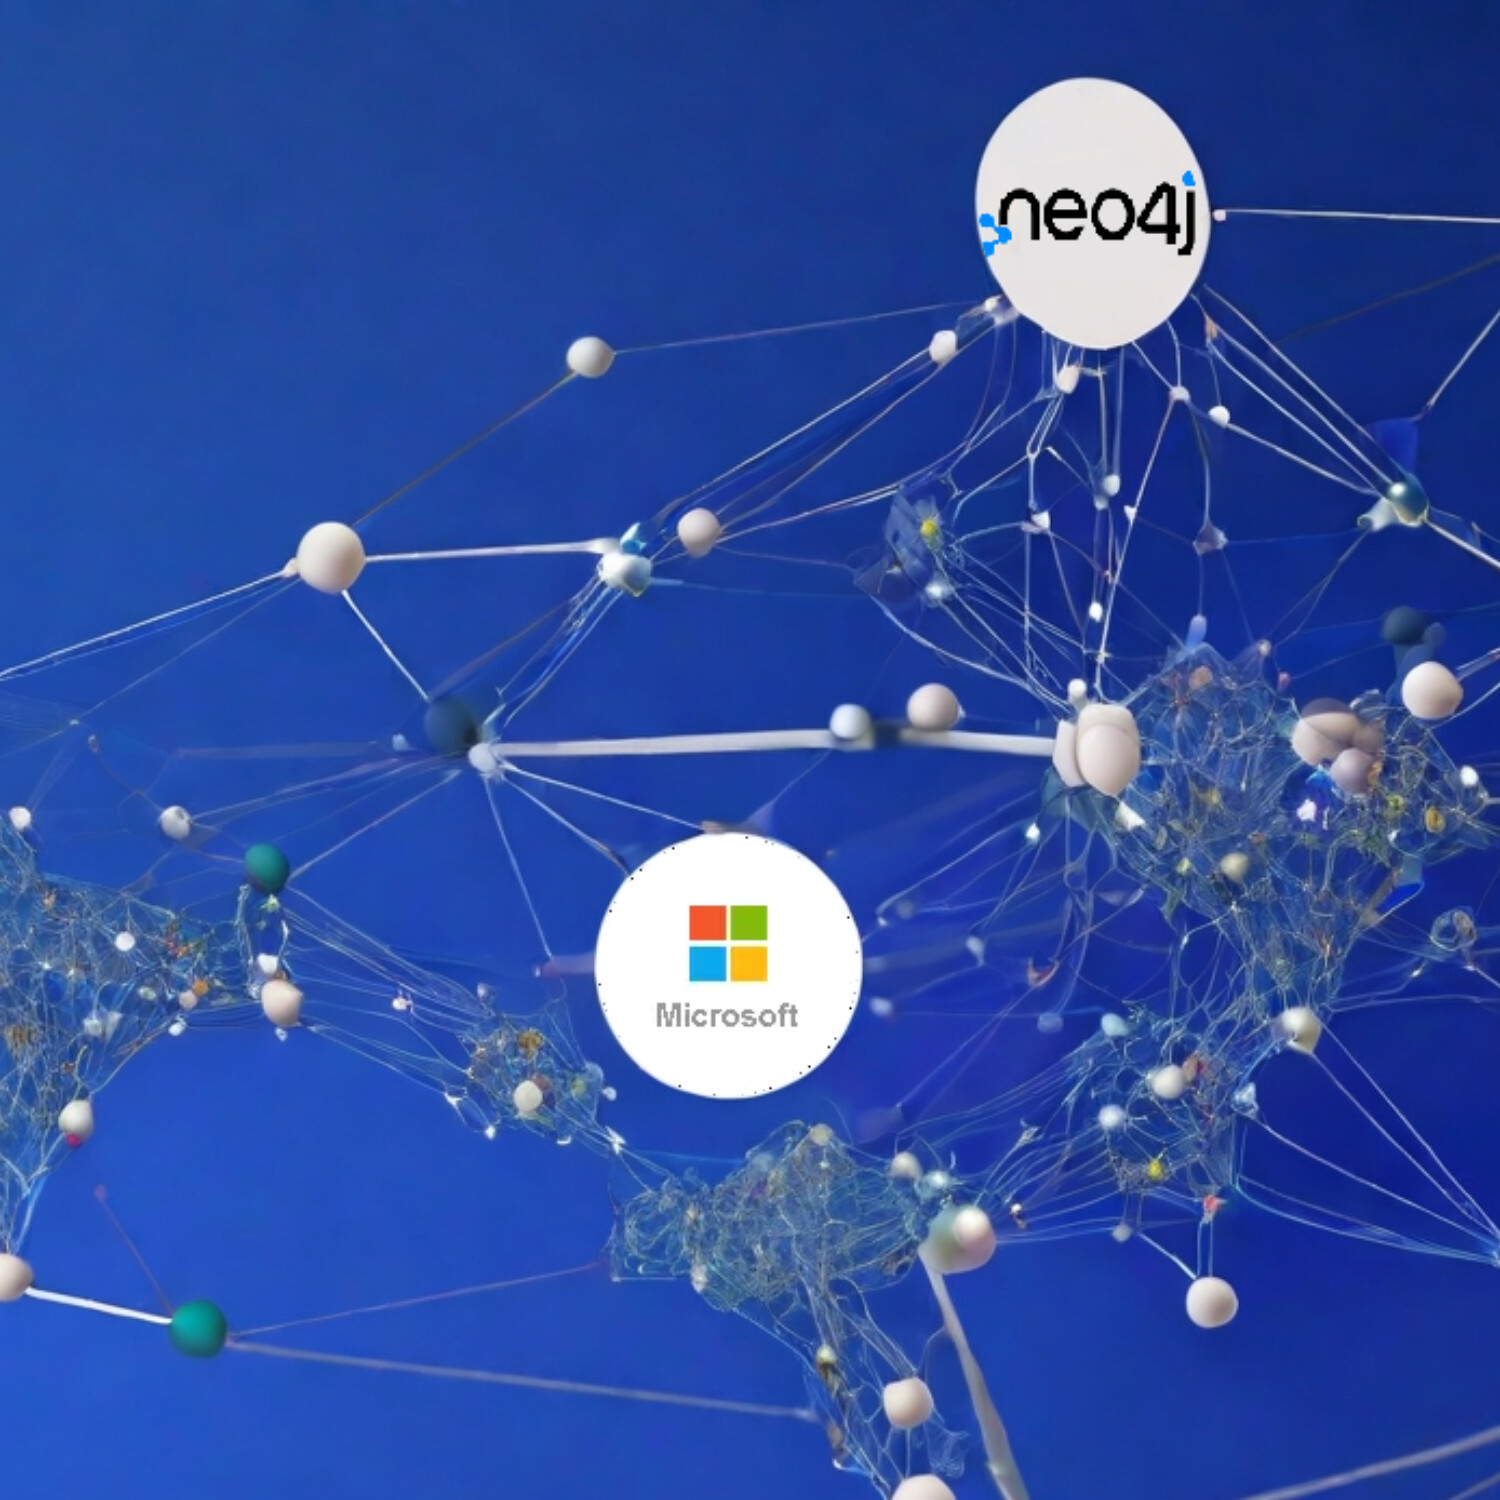 Neo4j partners with Microsoft, unfolds strategy to power Generative AI applications with cloud platforms and Graph RAG. Featuring Neo4j CPO Sudhir Hasbe